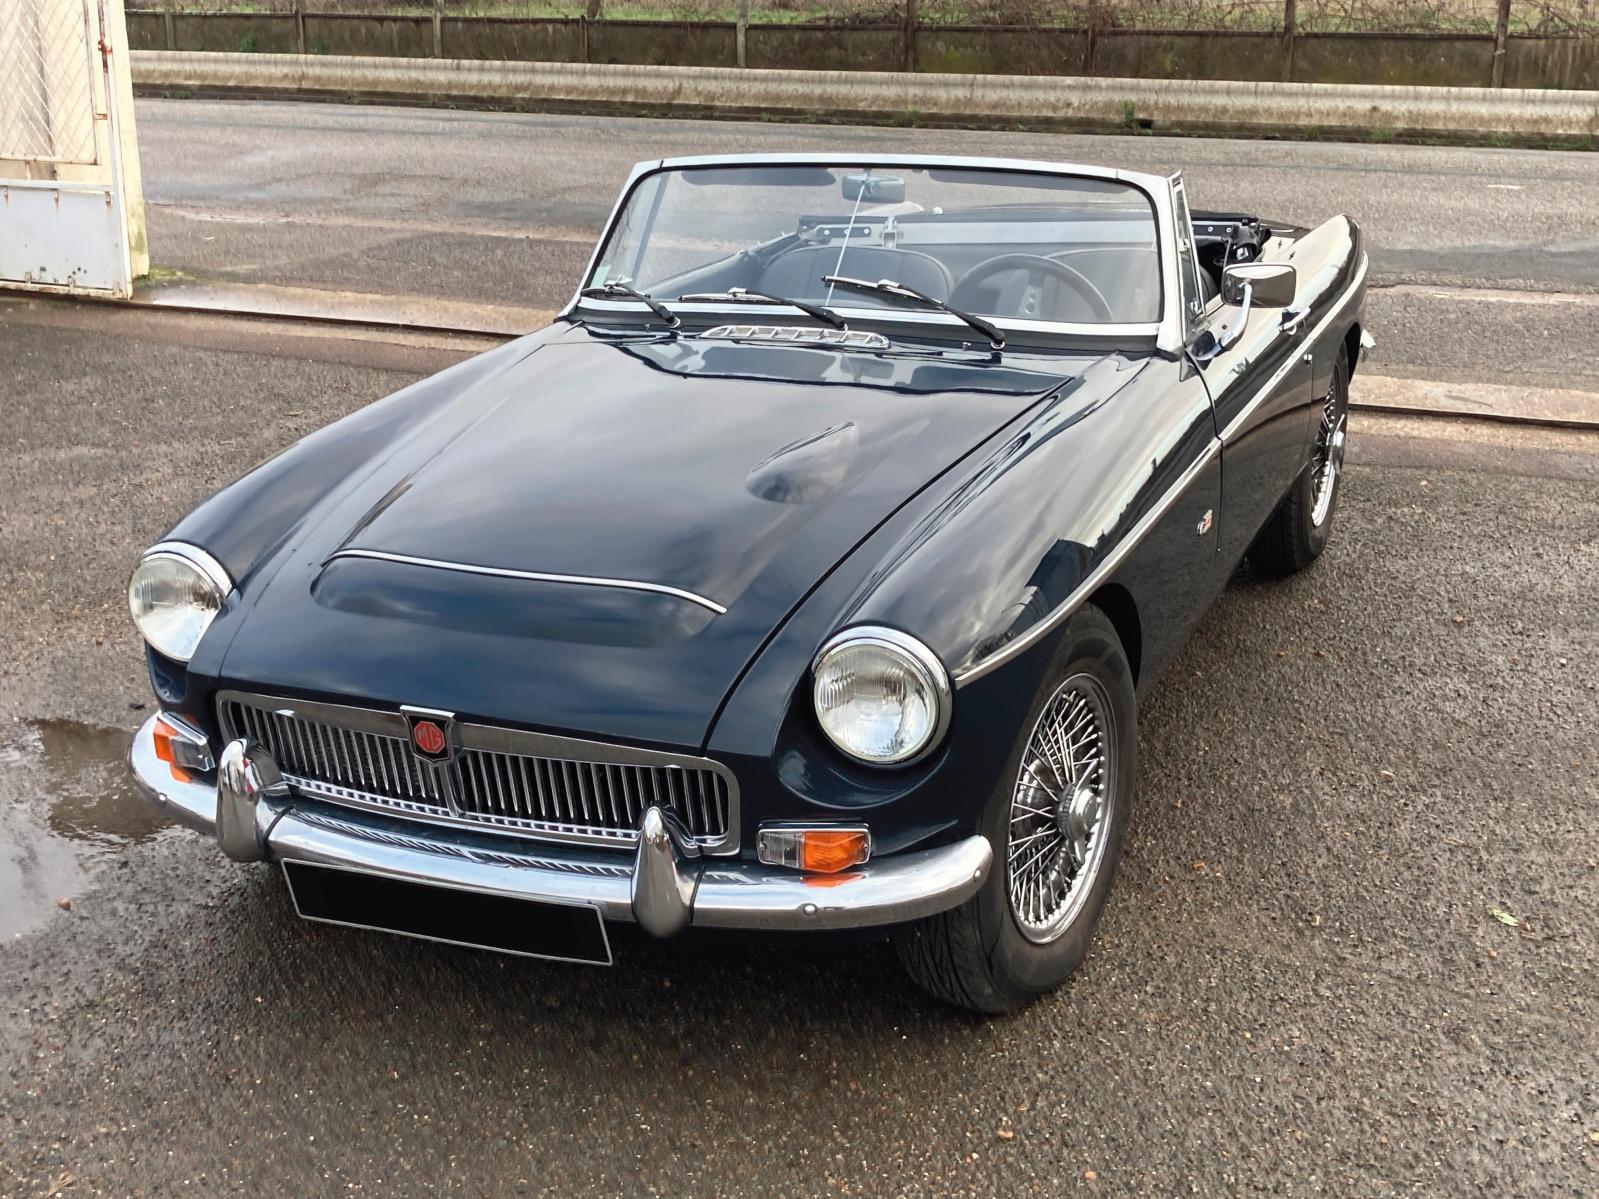 MGC cabriolet, bolide des sixties